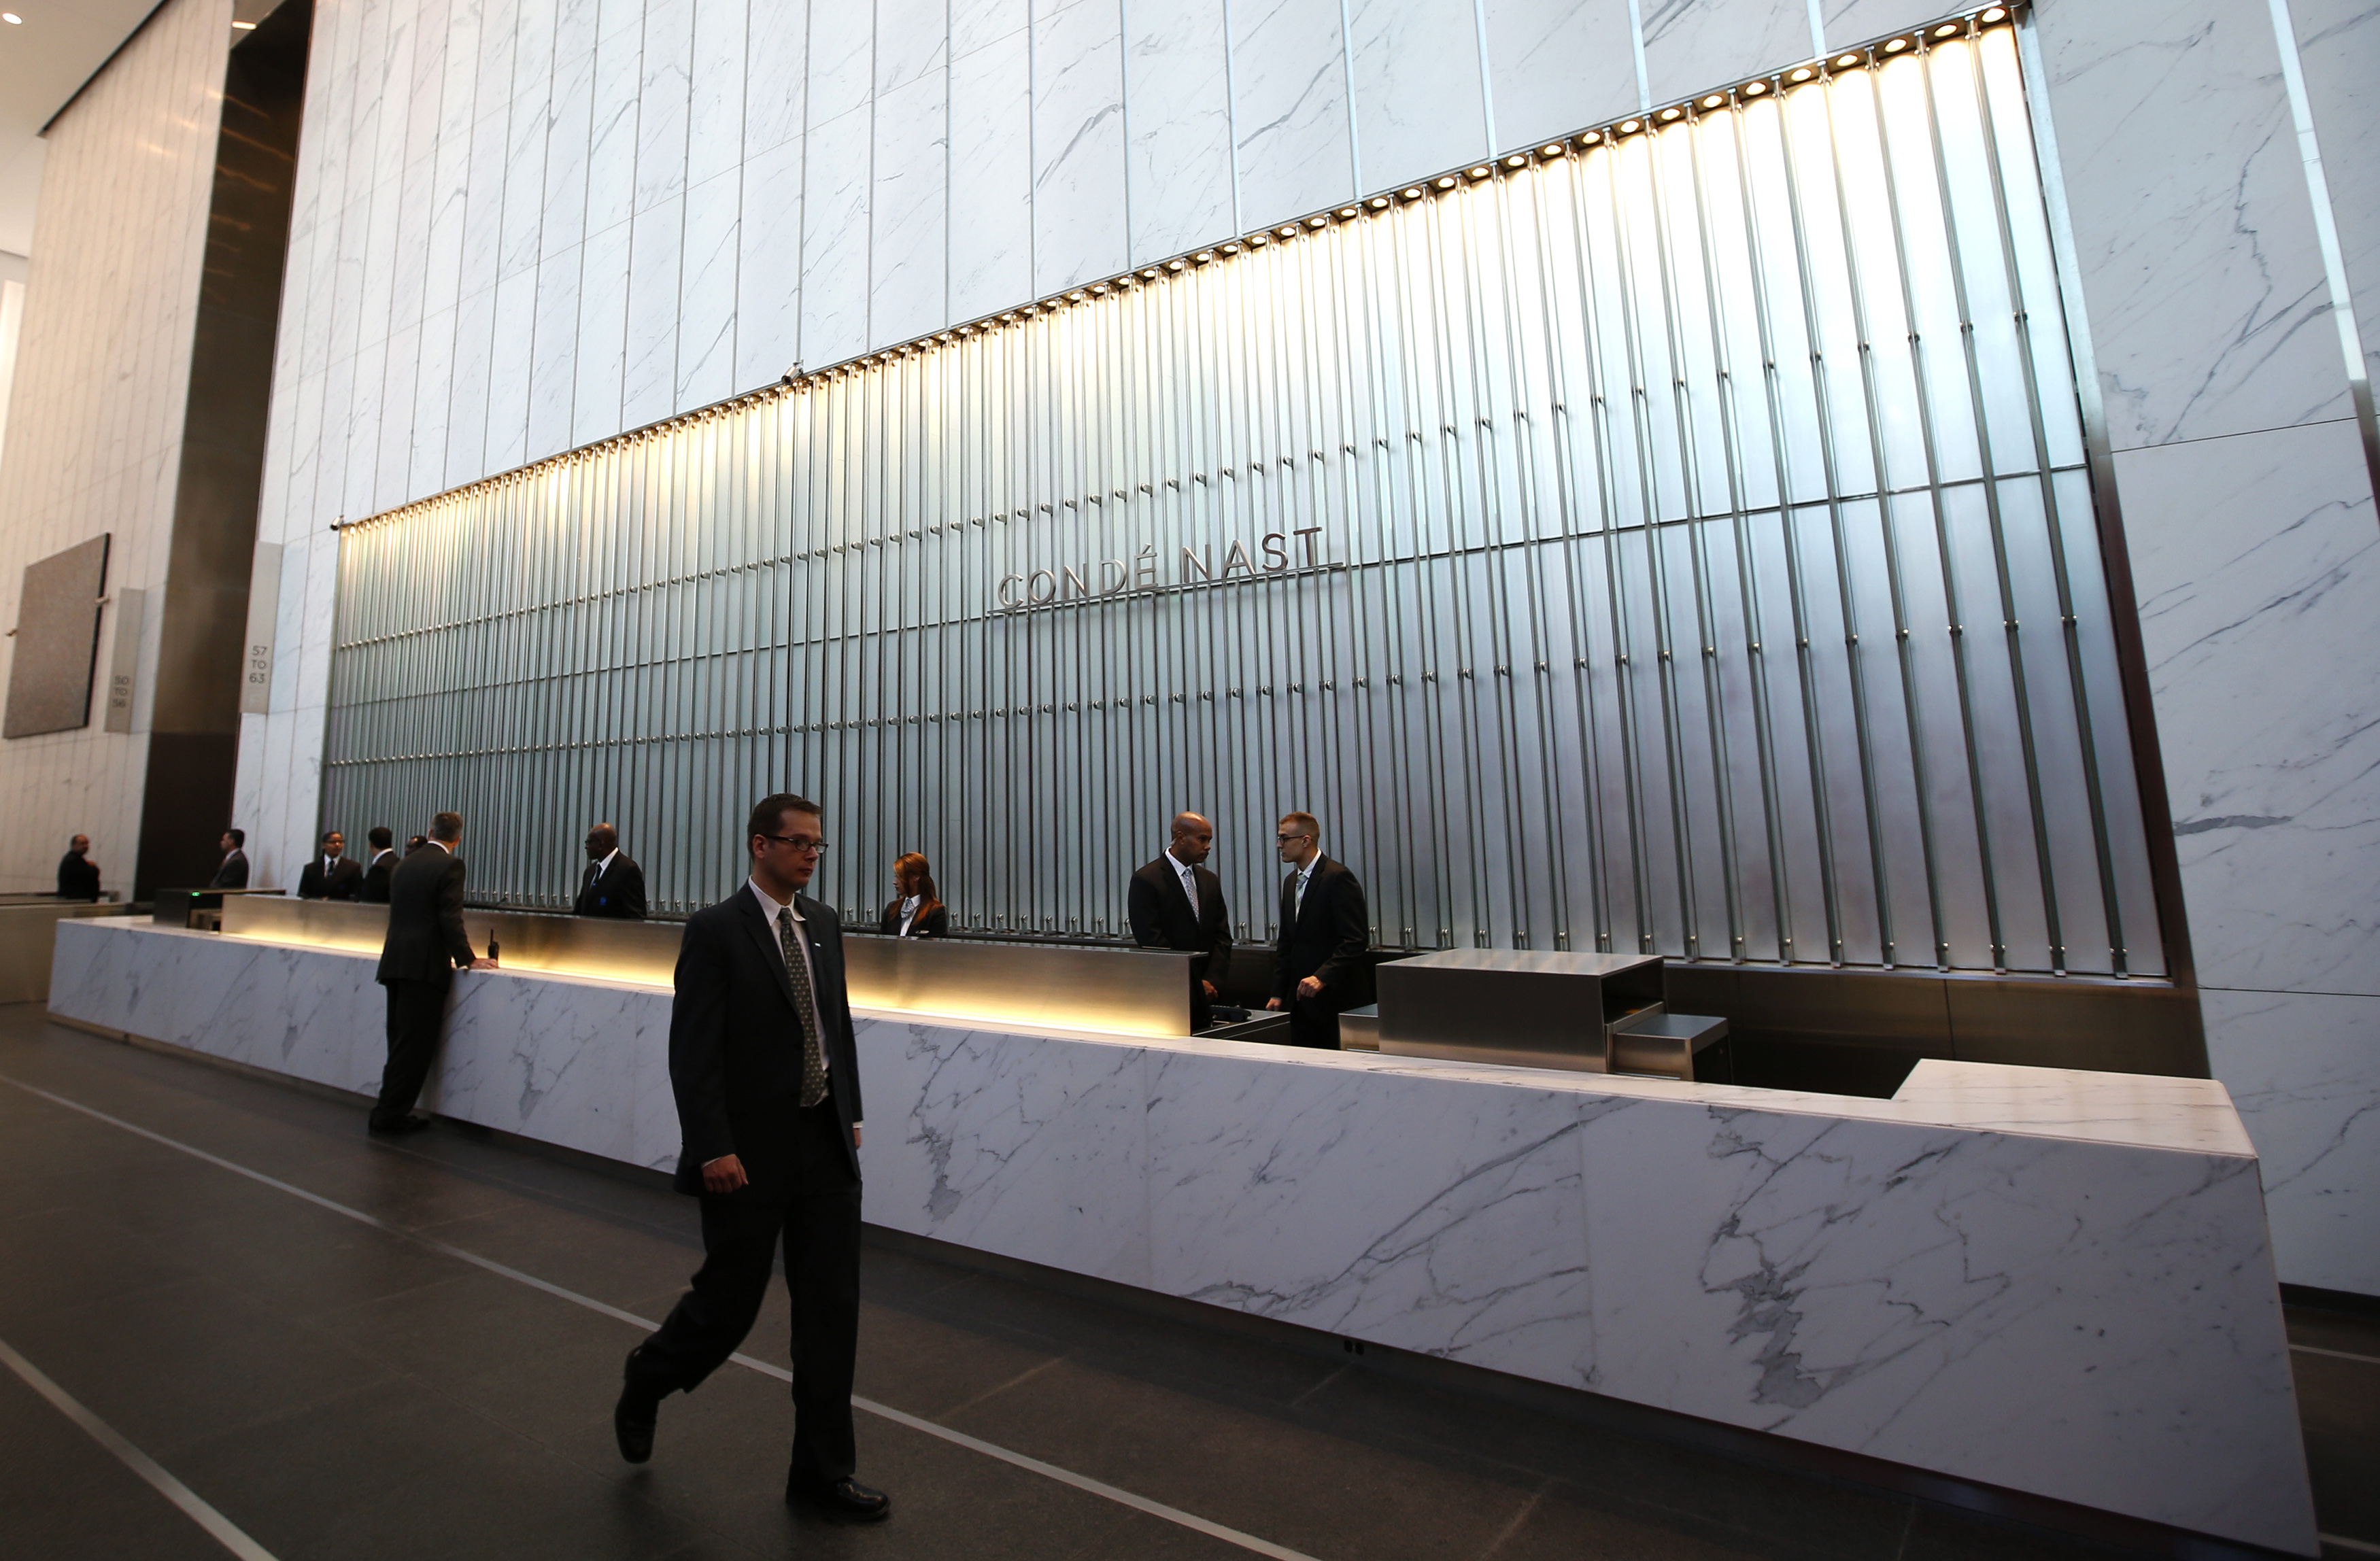 Conde Nast employees work in the lobby of the One World Trade Center tower in New York